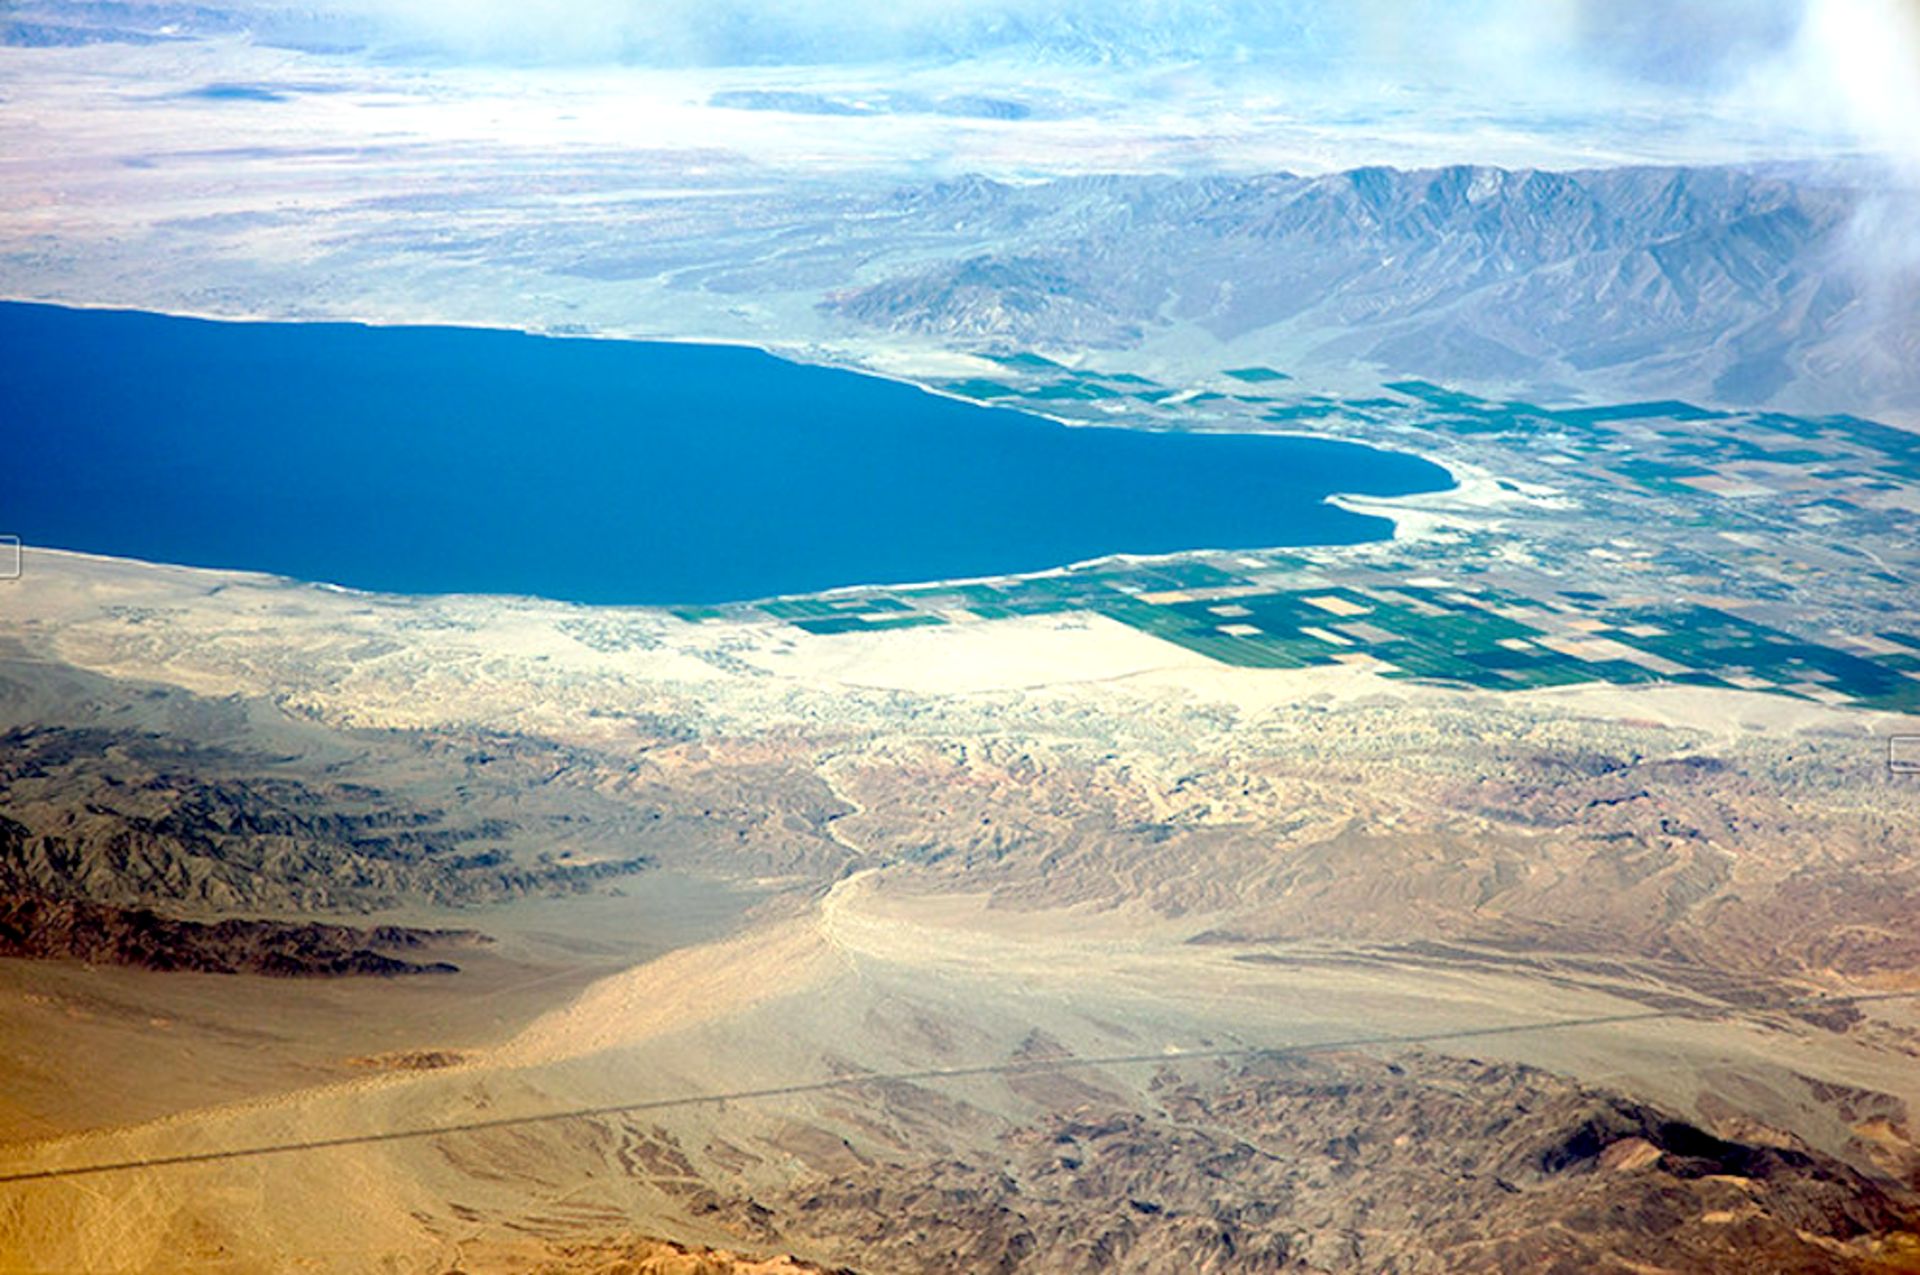 Plenty of Adventure on This Slice of Southern California near the Salton Sea in Imperial County, CA! - Image 10 of 14